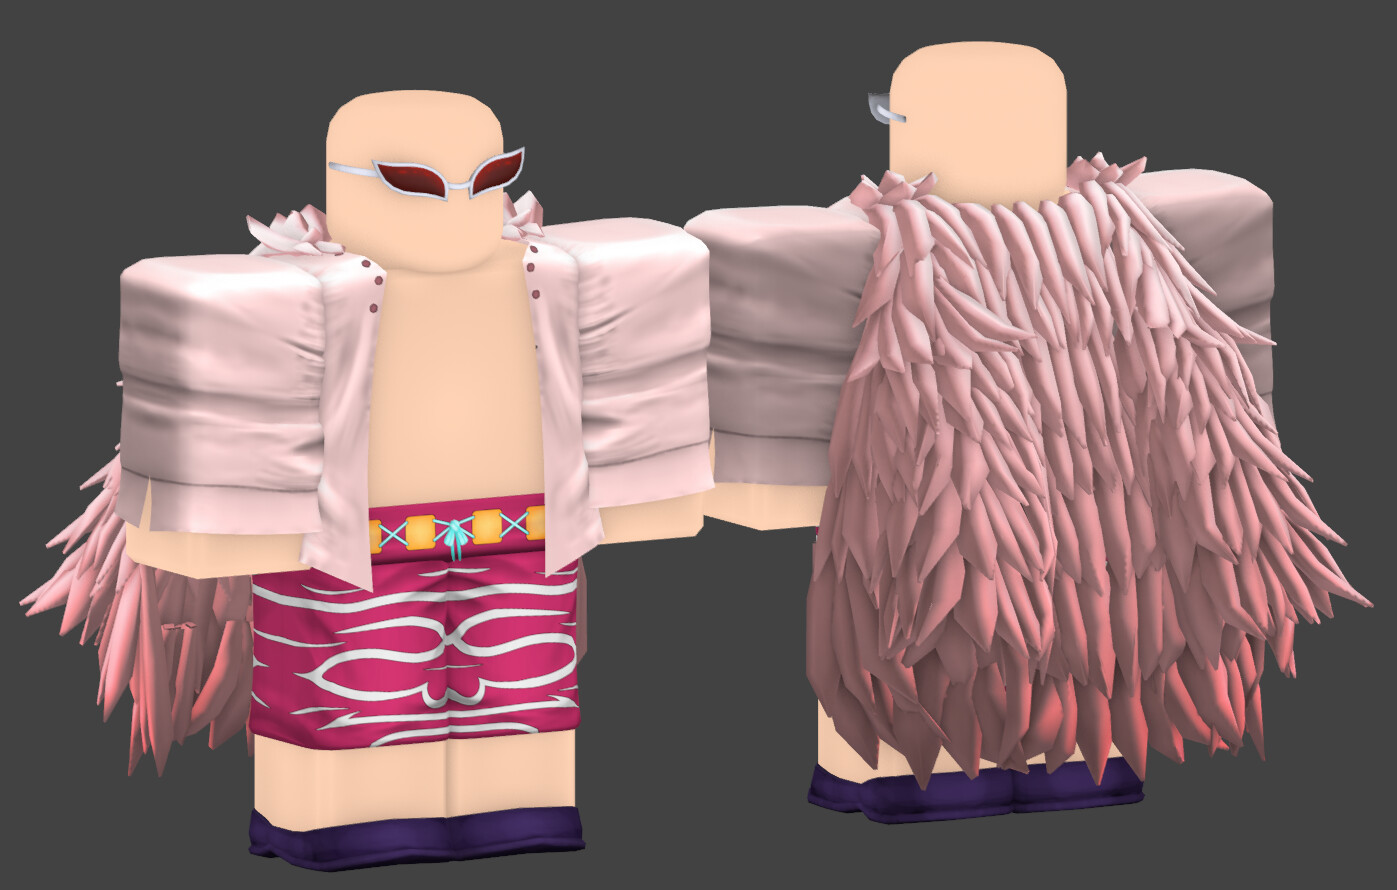 How to make Doflamingo outfit in roblox 